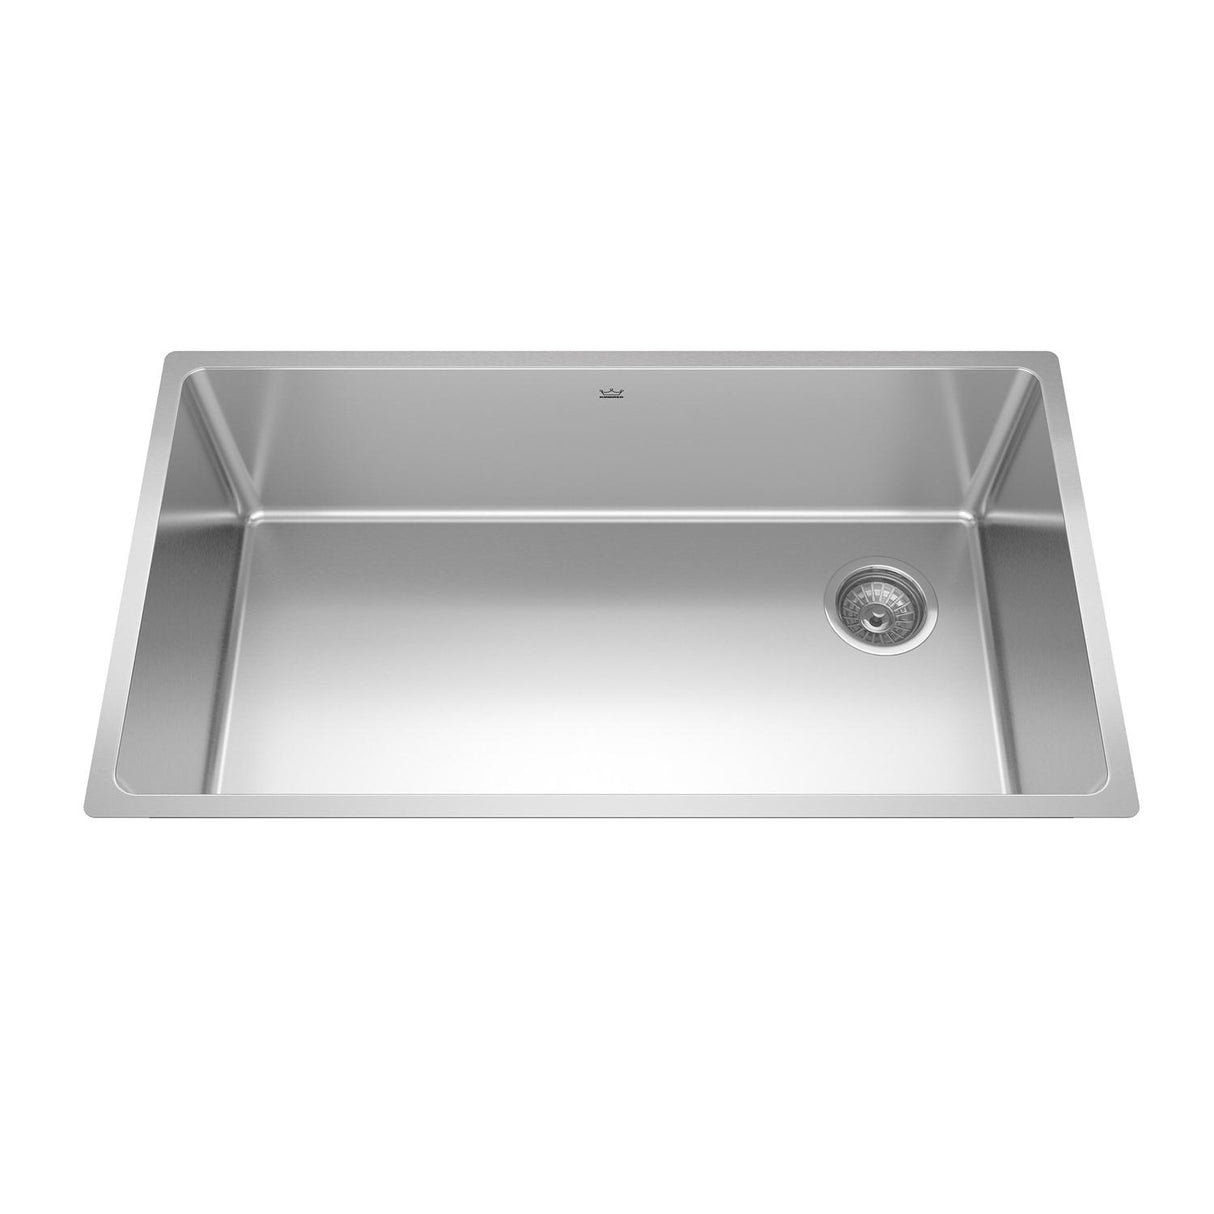 KINDRED BSU1832-9N-OW Brookmore 32.5-in LR x 18.2-in FB x 9-in DP Undermount Single Bowl Stainless Steel Sink In Commercial Satin Finish